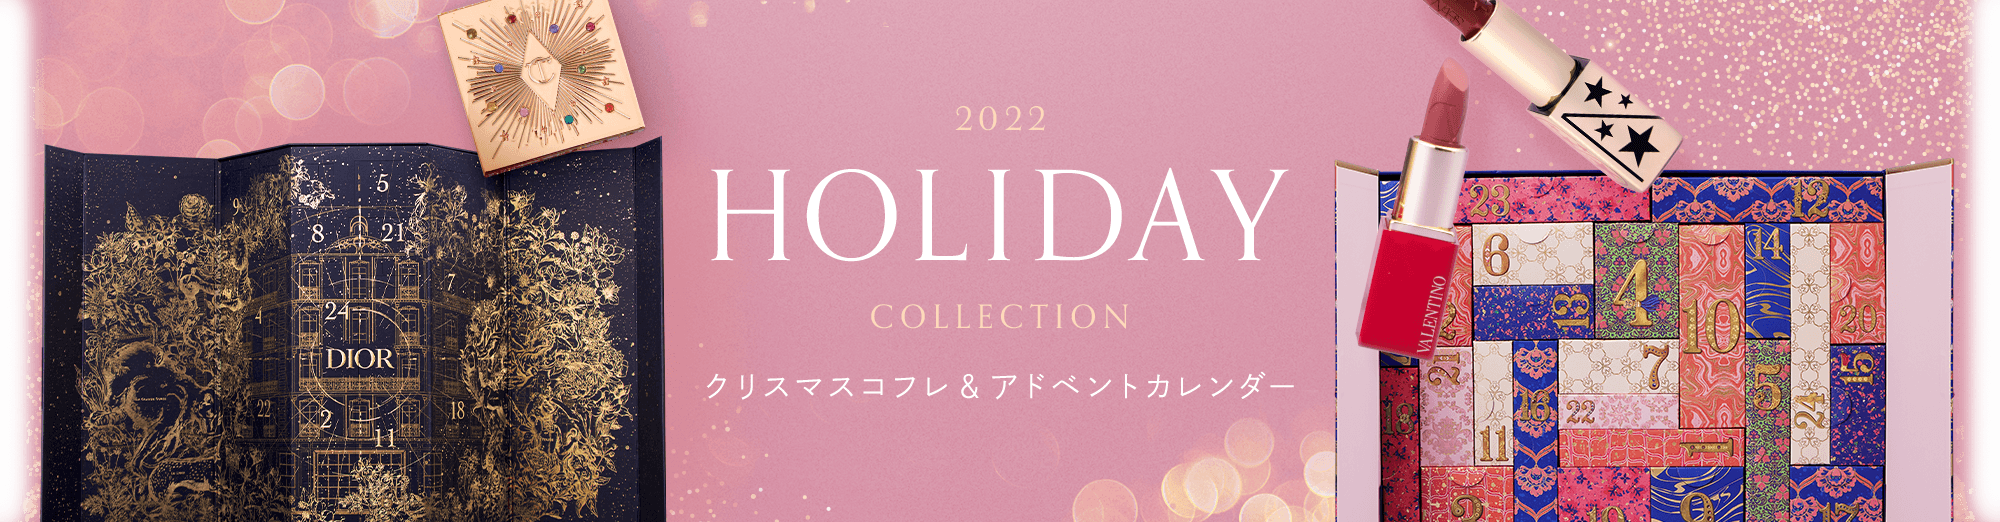 2022 HOLIDAY COSME COLLECTION クリスマスコフレ＆アドベントカレンダー